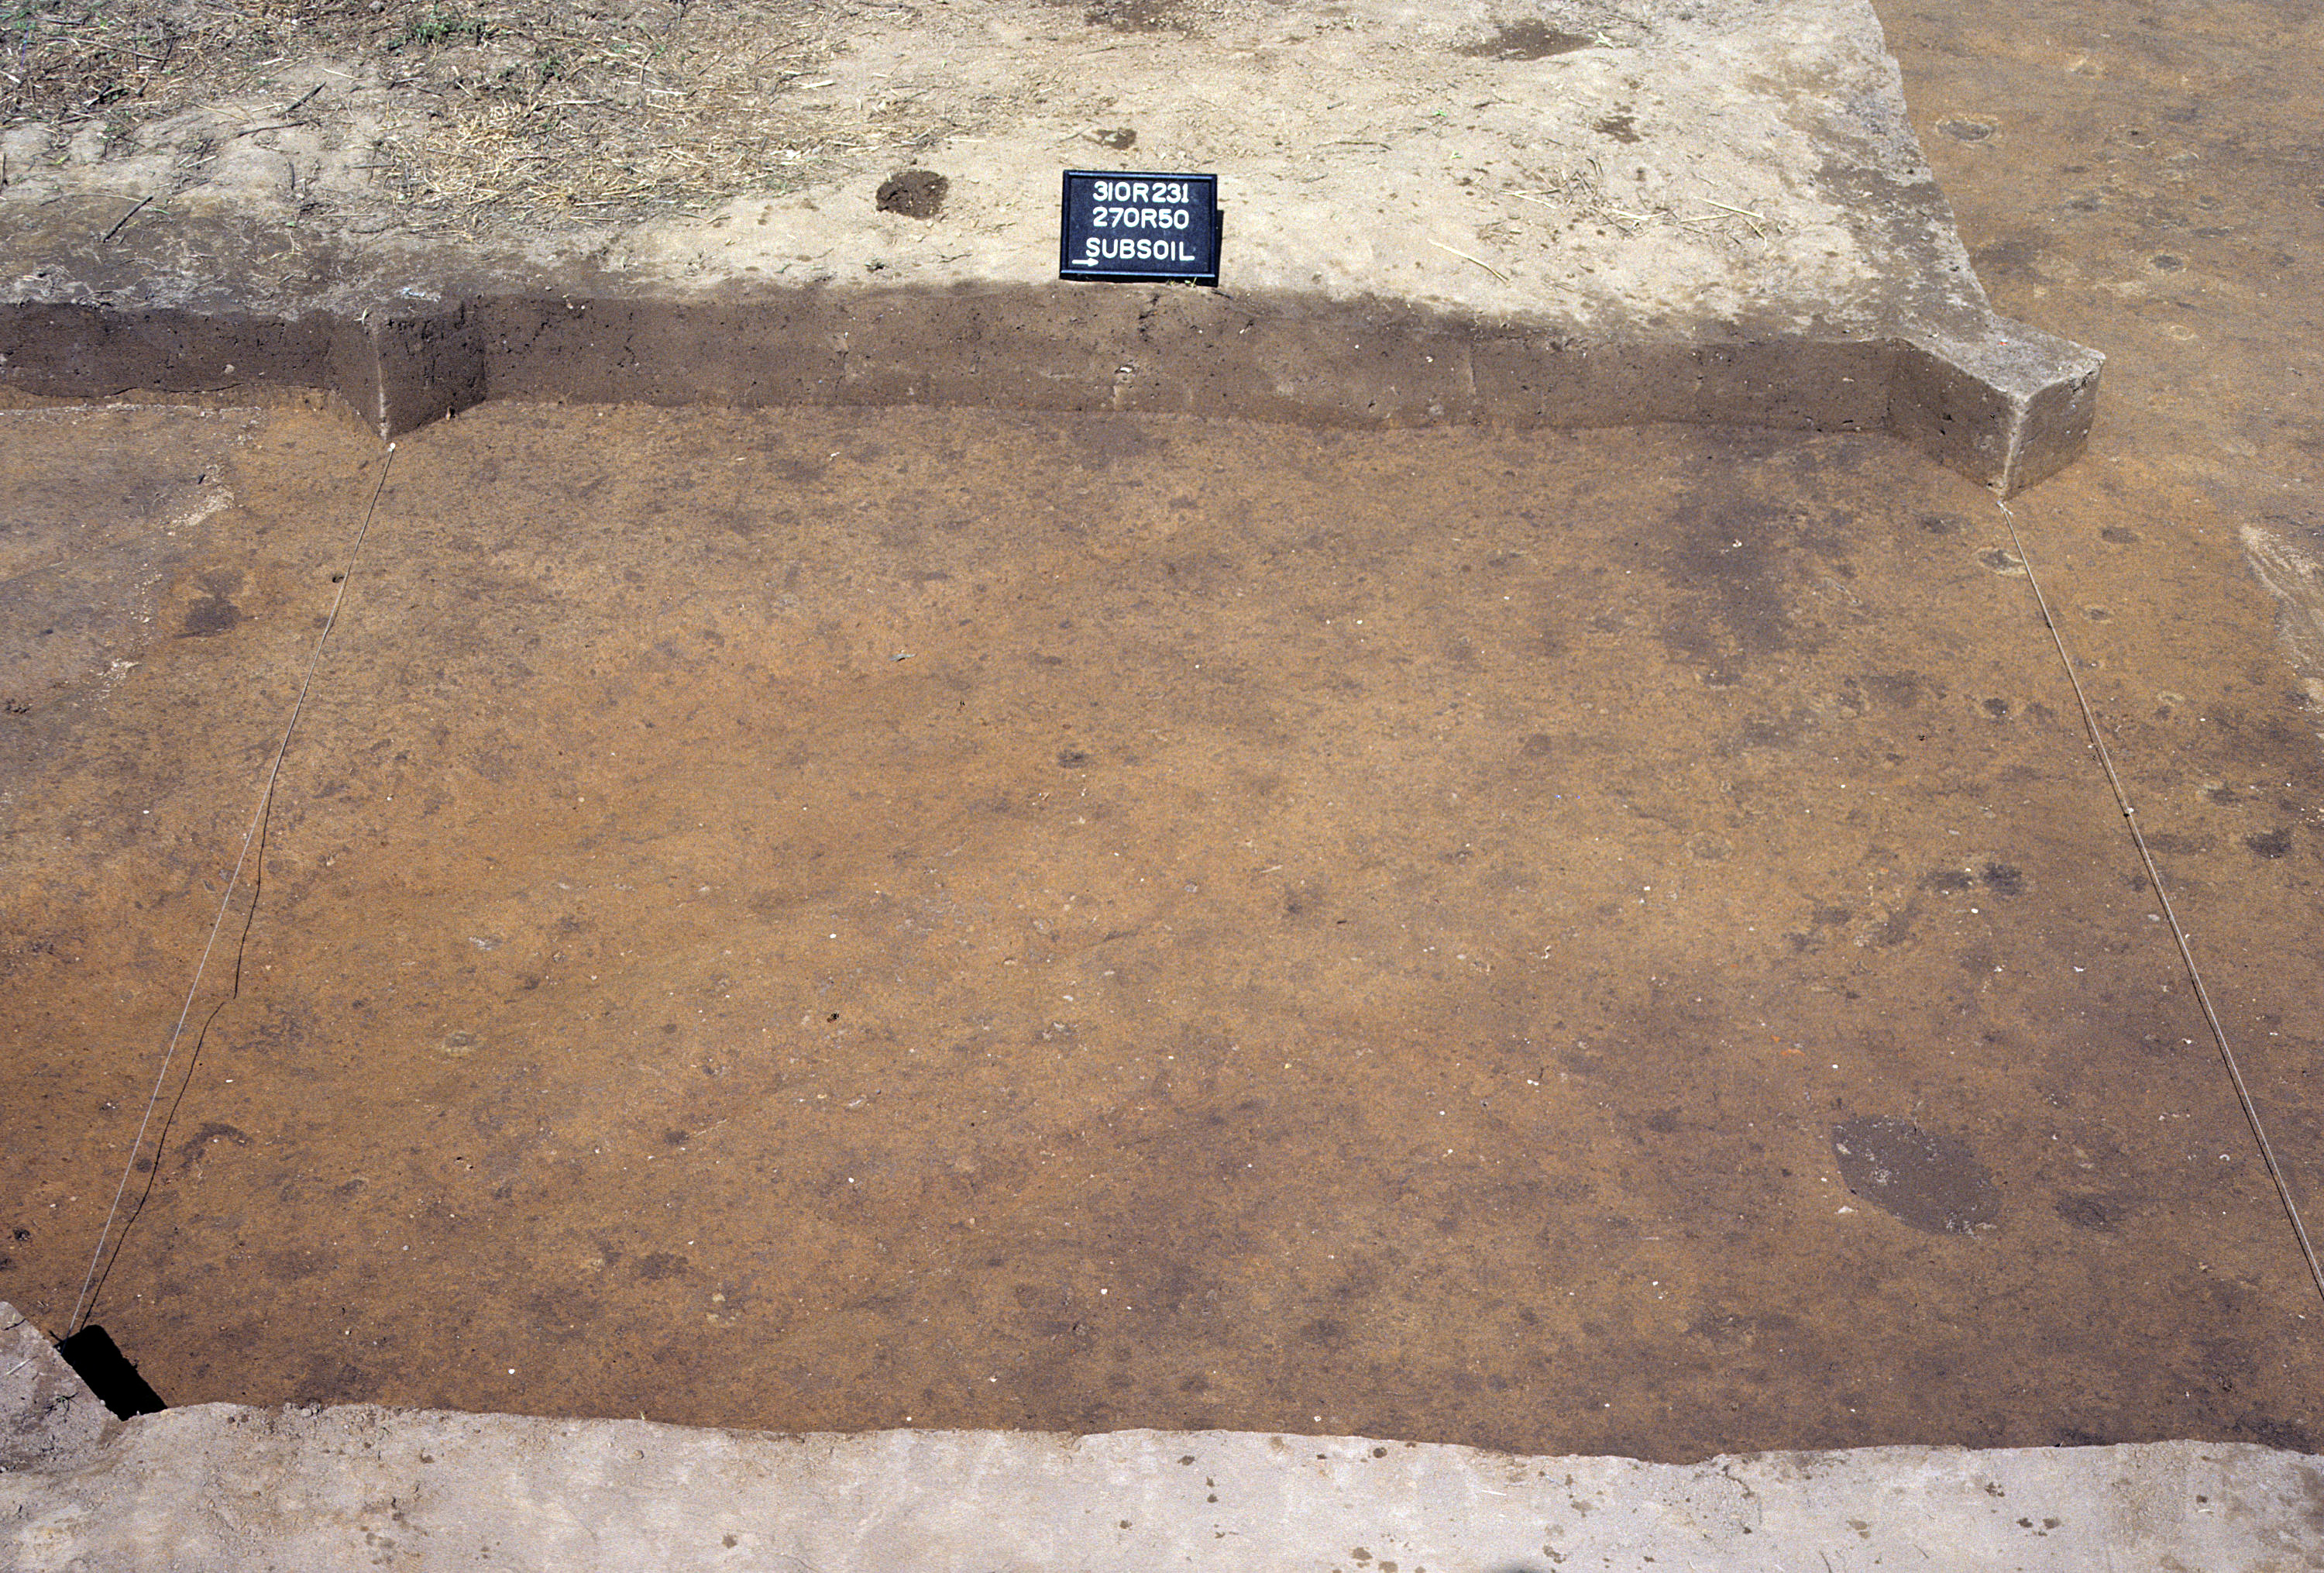 Figure 935. Sq. 270R50 at top of subsoil (view to west).